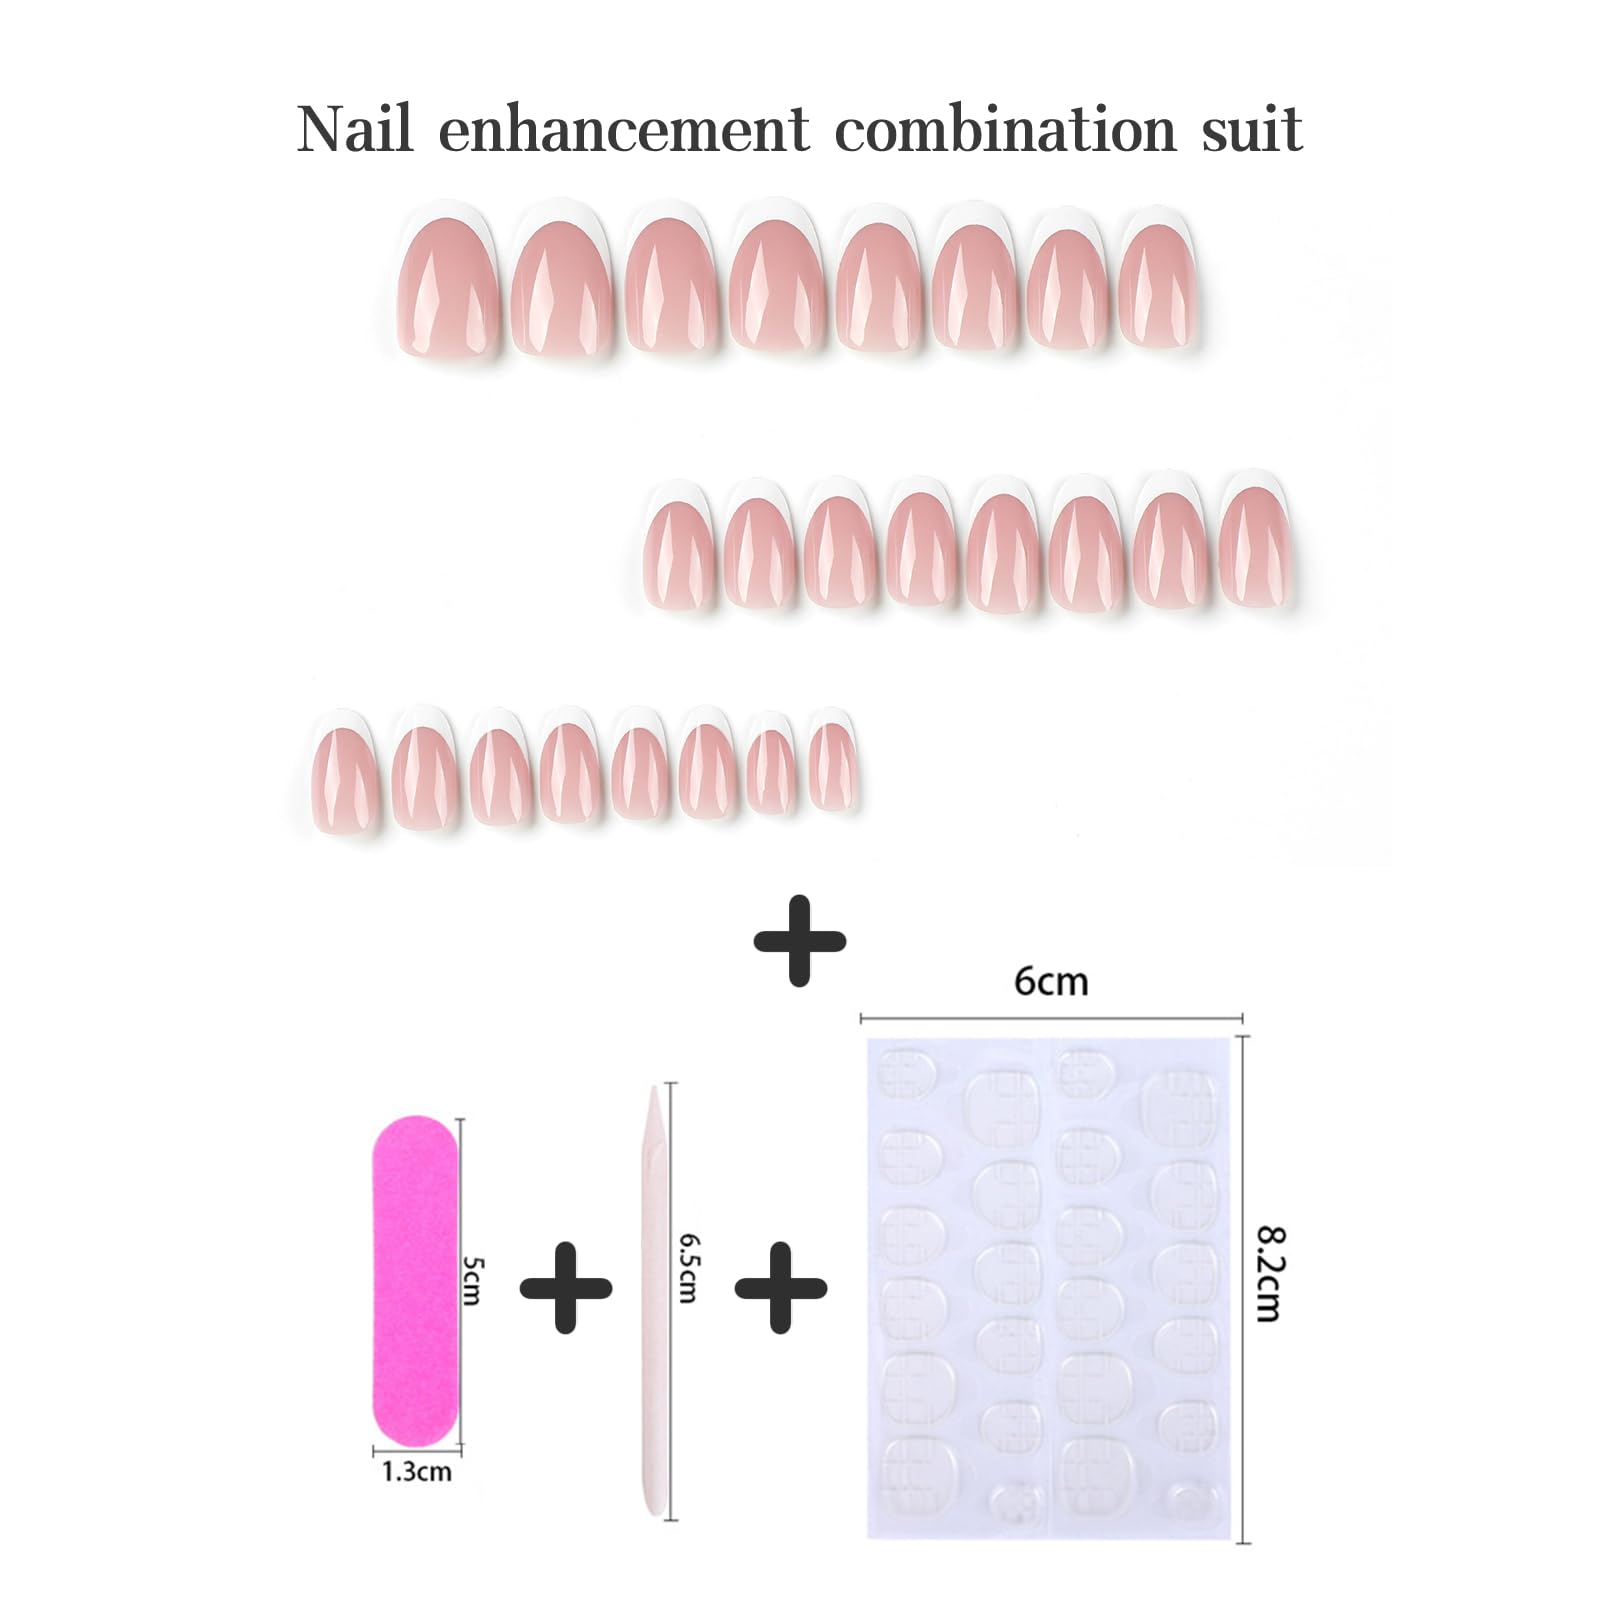 24pcs Short Square False Nails, Purple Pink Stick on Nails Solid Color Press on Nails Removable Glue-on Nails Full Cover Fake Nails Women Girls Nail Art Accessories